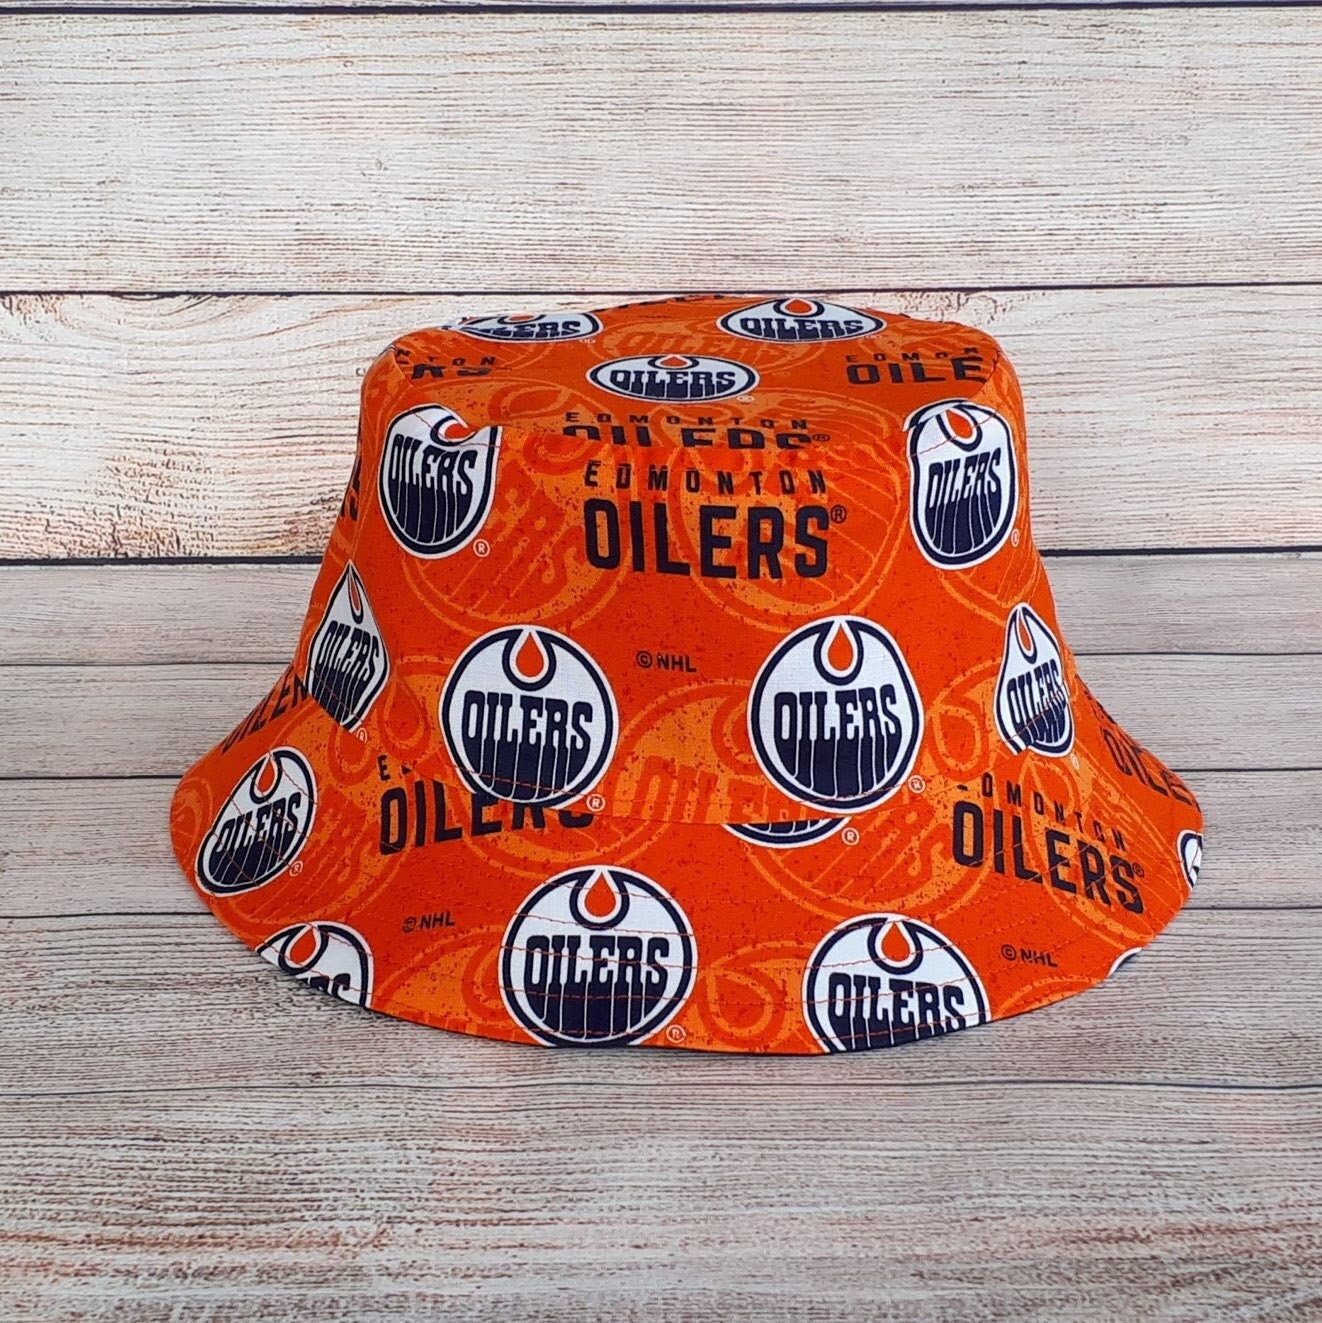 Oilers fans have very mixed reactions to the Oil Gear reverse